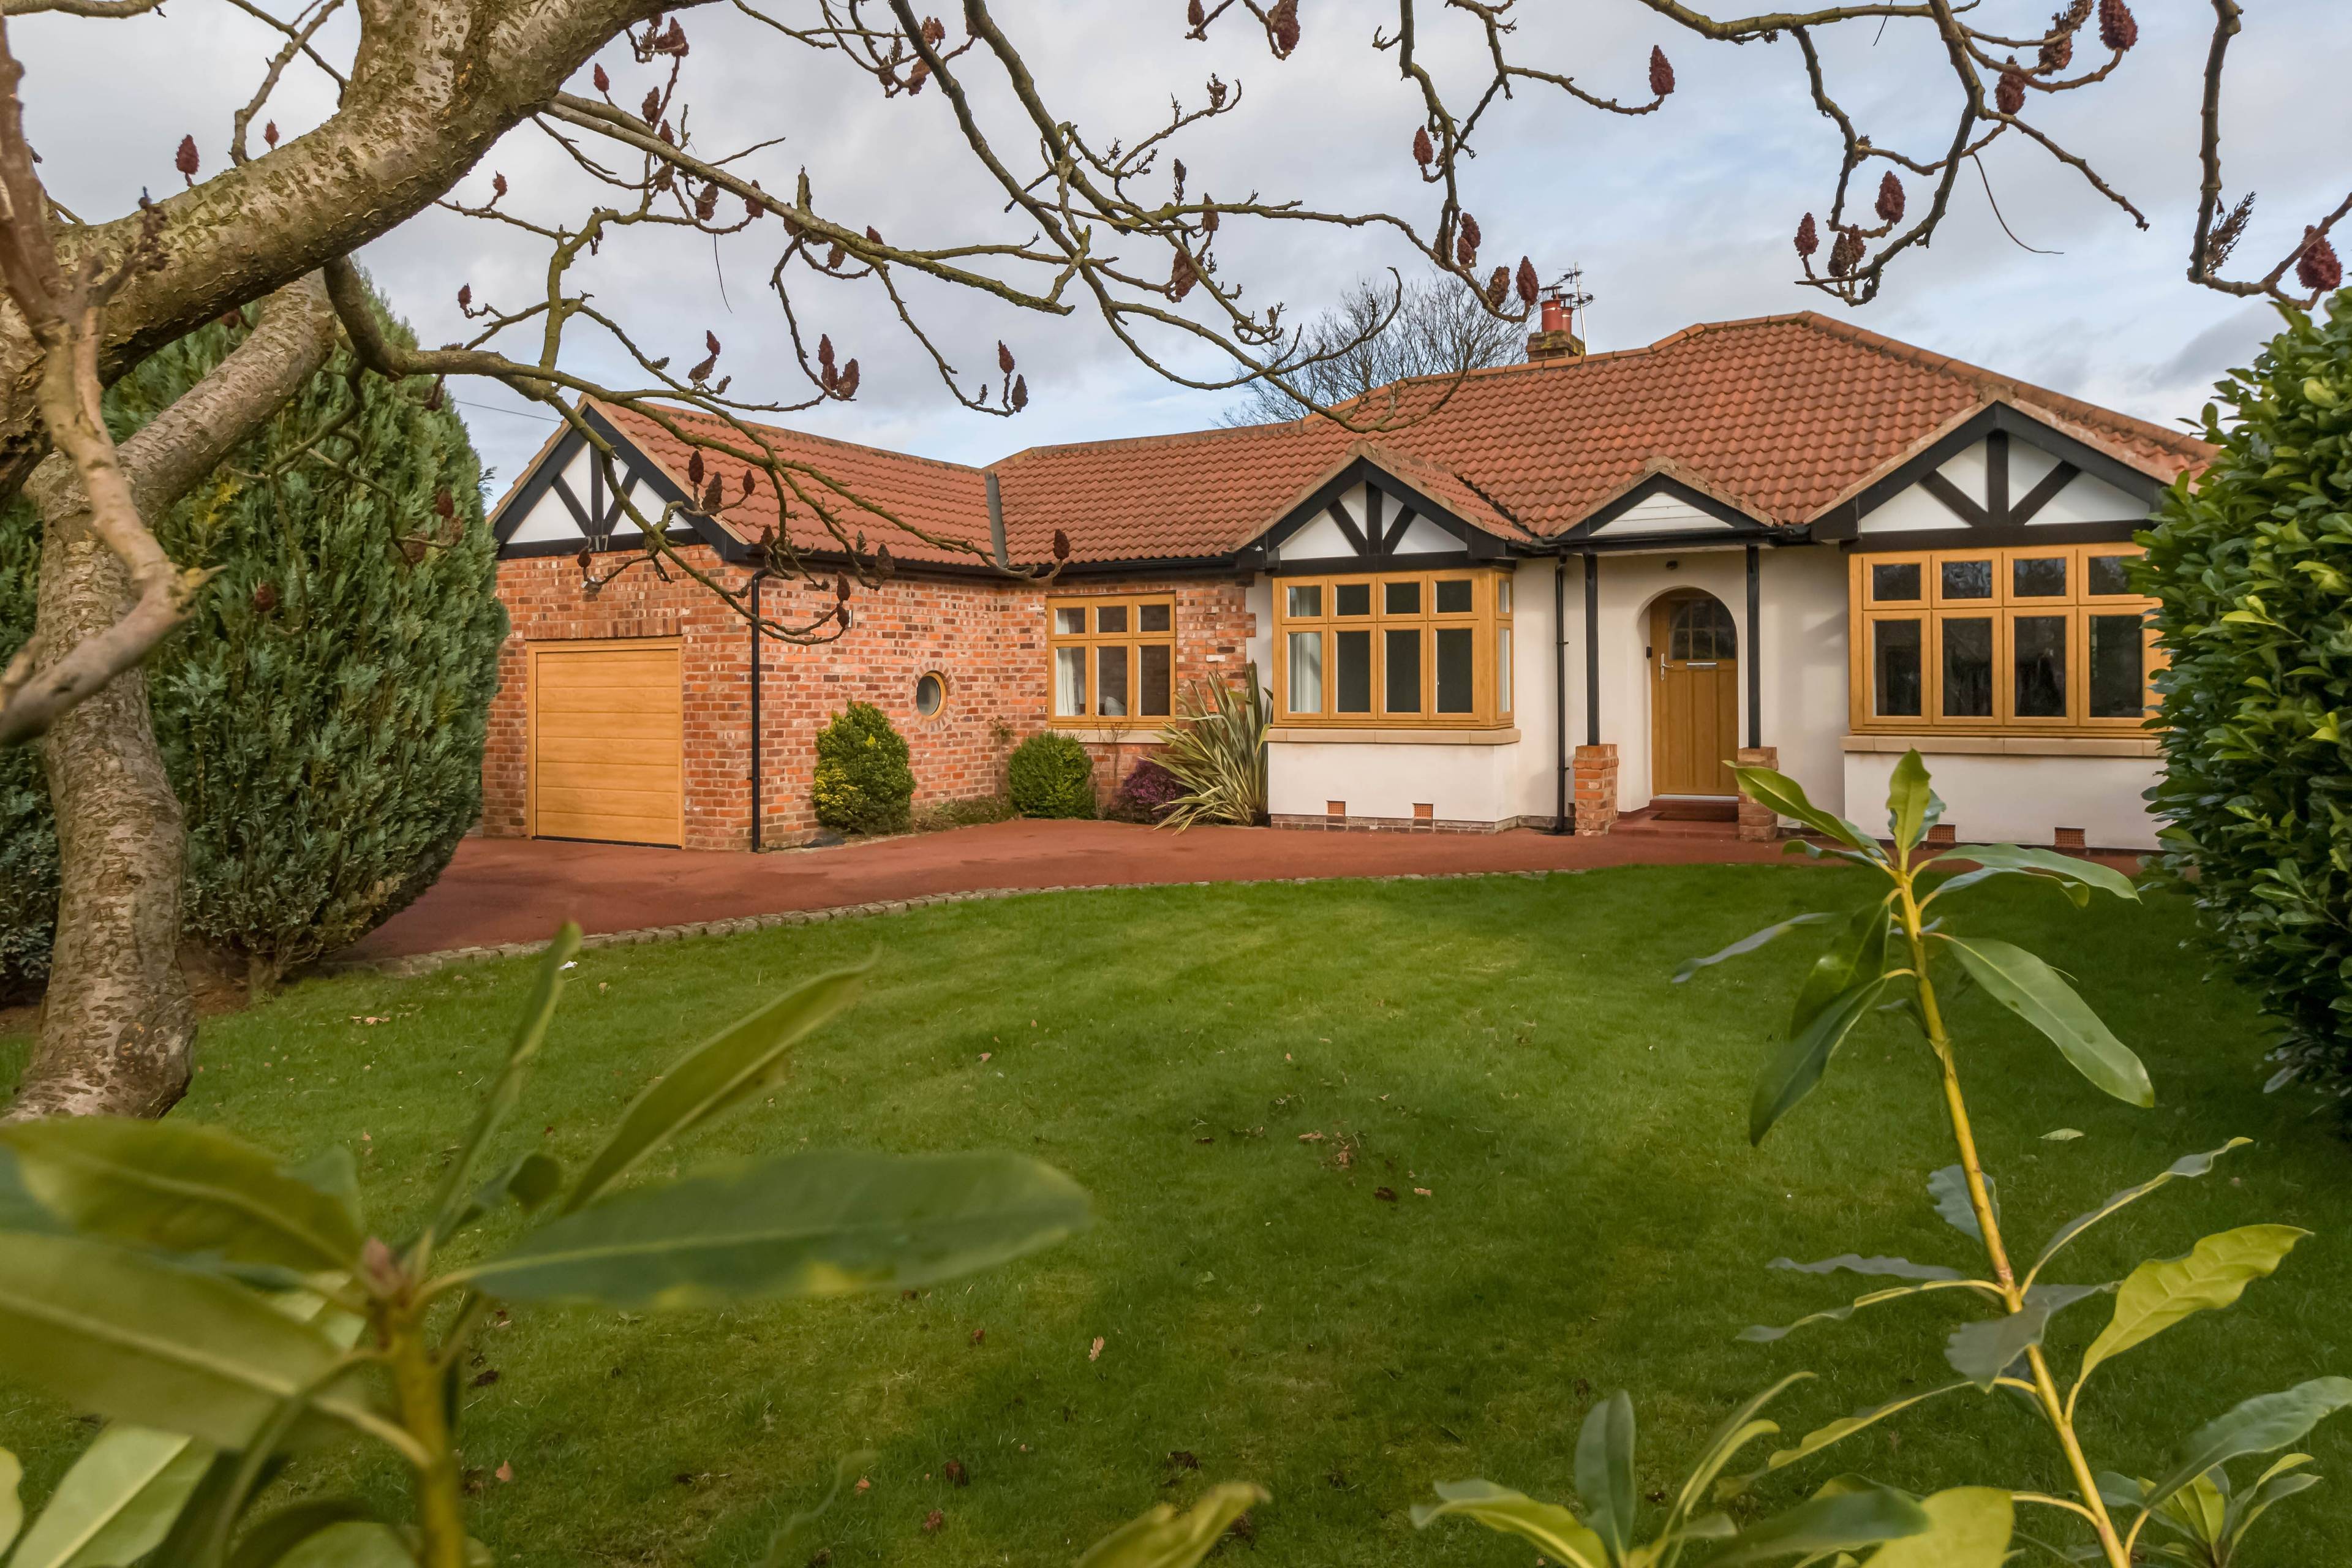 A stunning newly renovated 3 bedroom detached bungalow finished to the highest specification throughout. Landscaped gardens to front & rear in a desirable location opposite open farmland. Situated on approximately 1/5 acre.